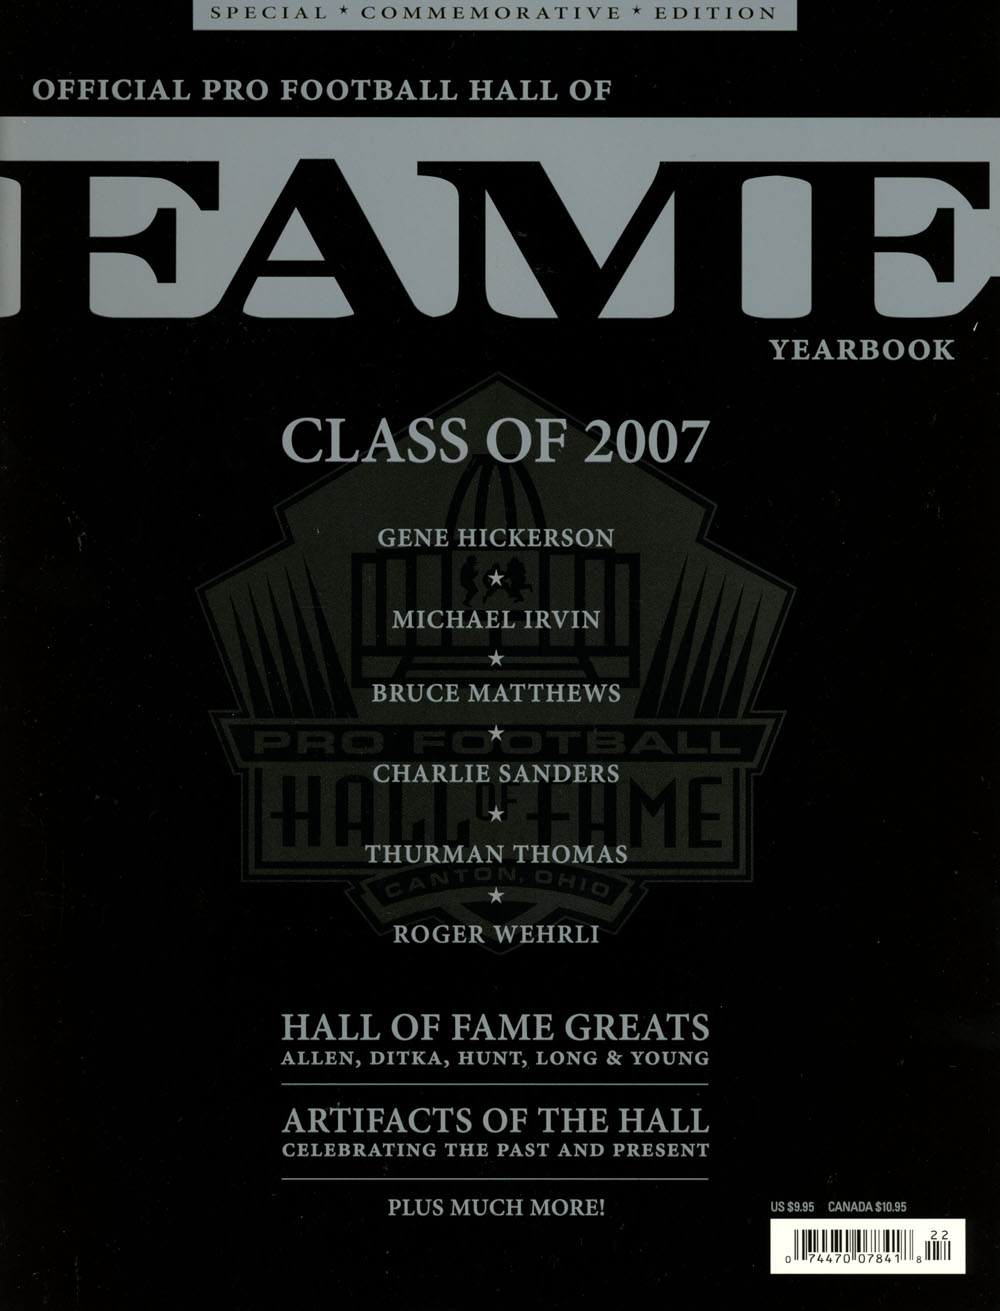 2007-2008 Official Pro Football Hall of Fame Yearbook